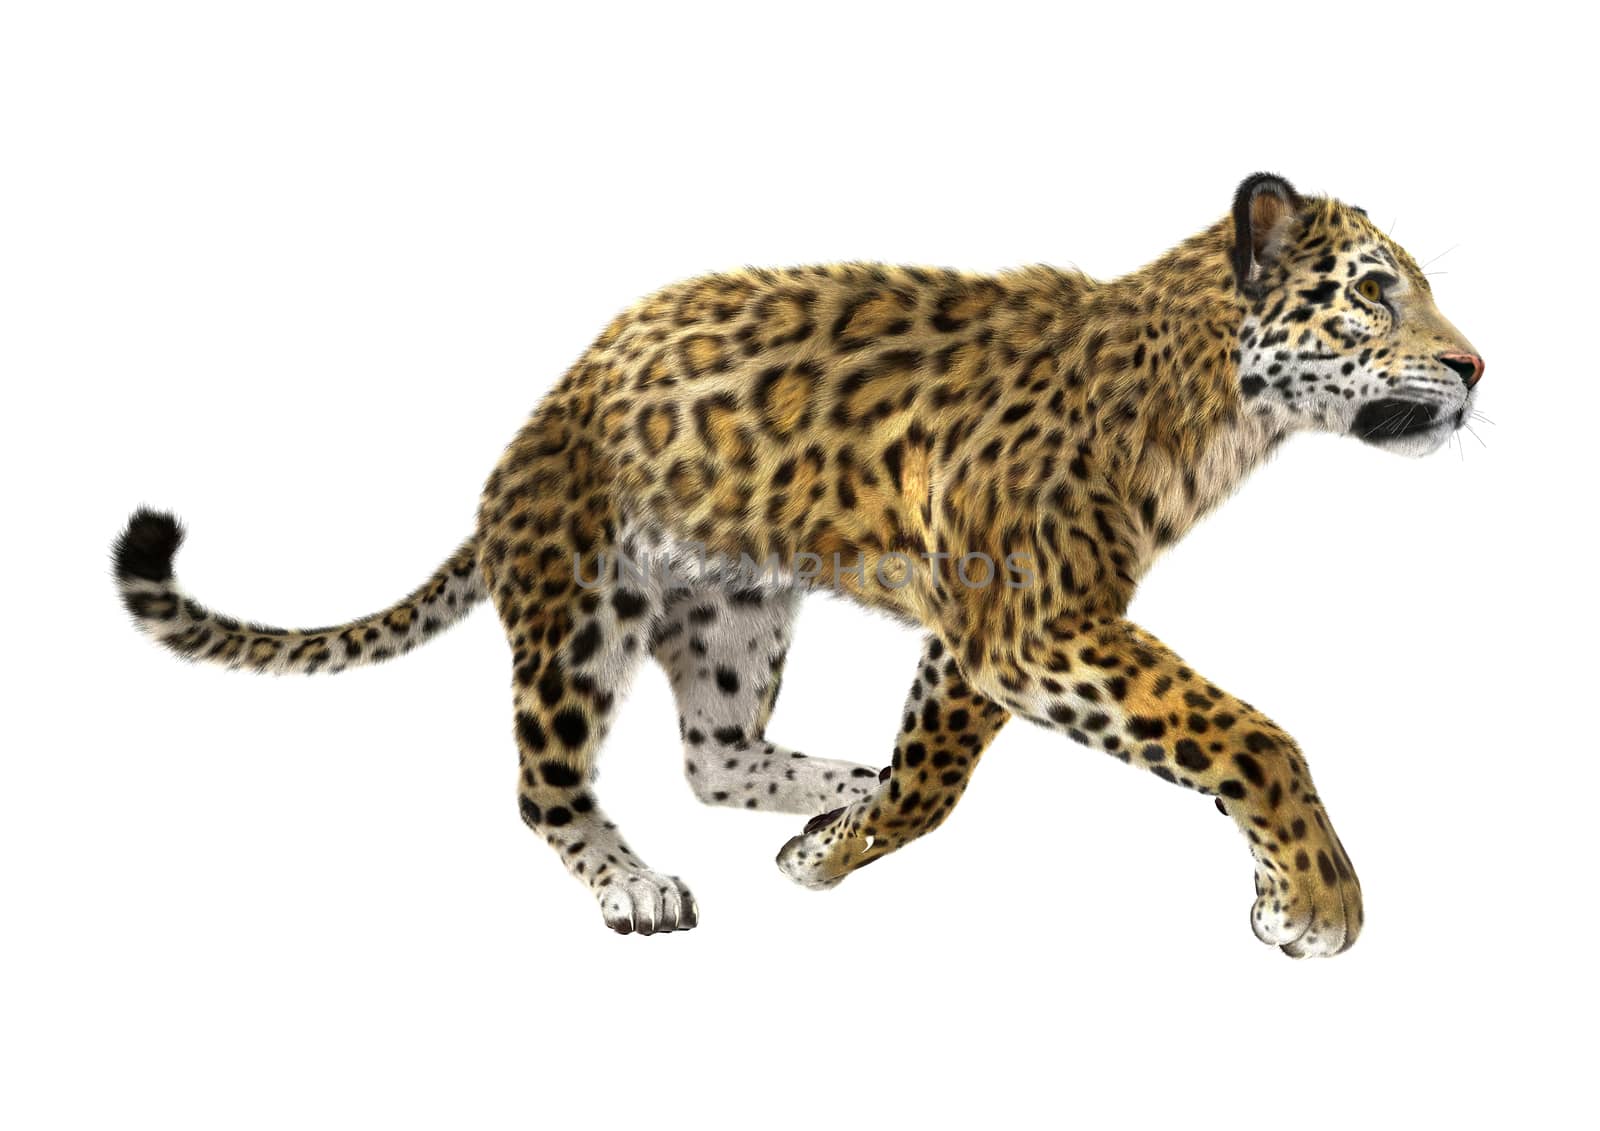 3D digital render of a big cat jaguar running isolated on white background